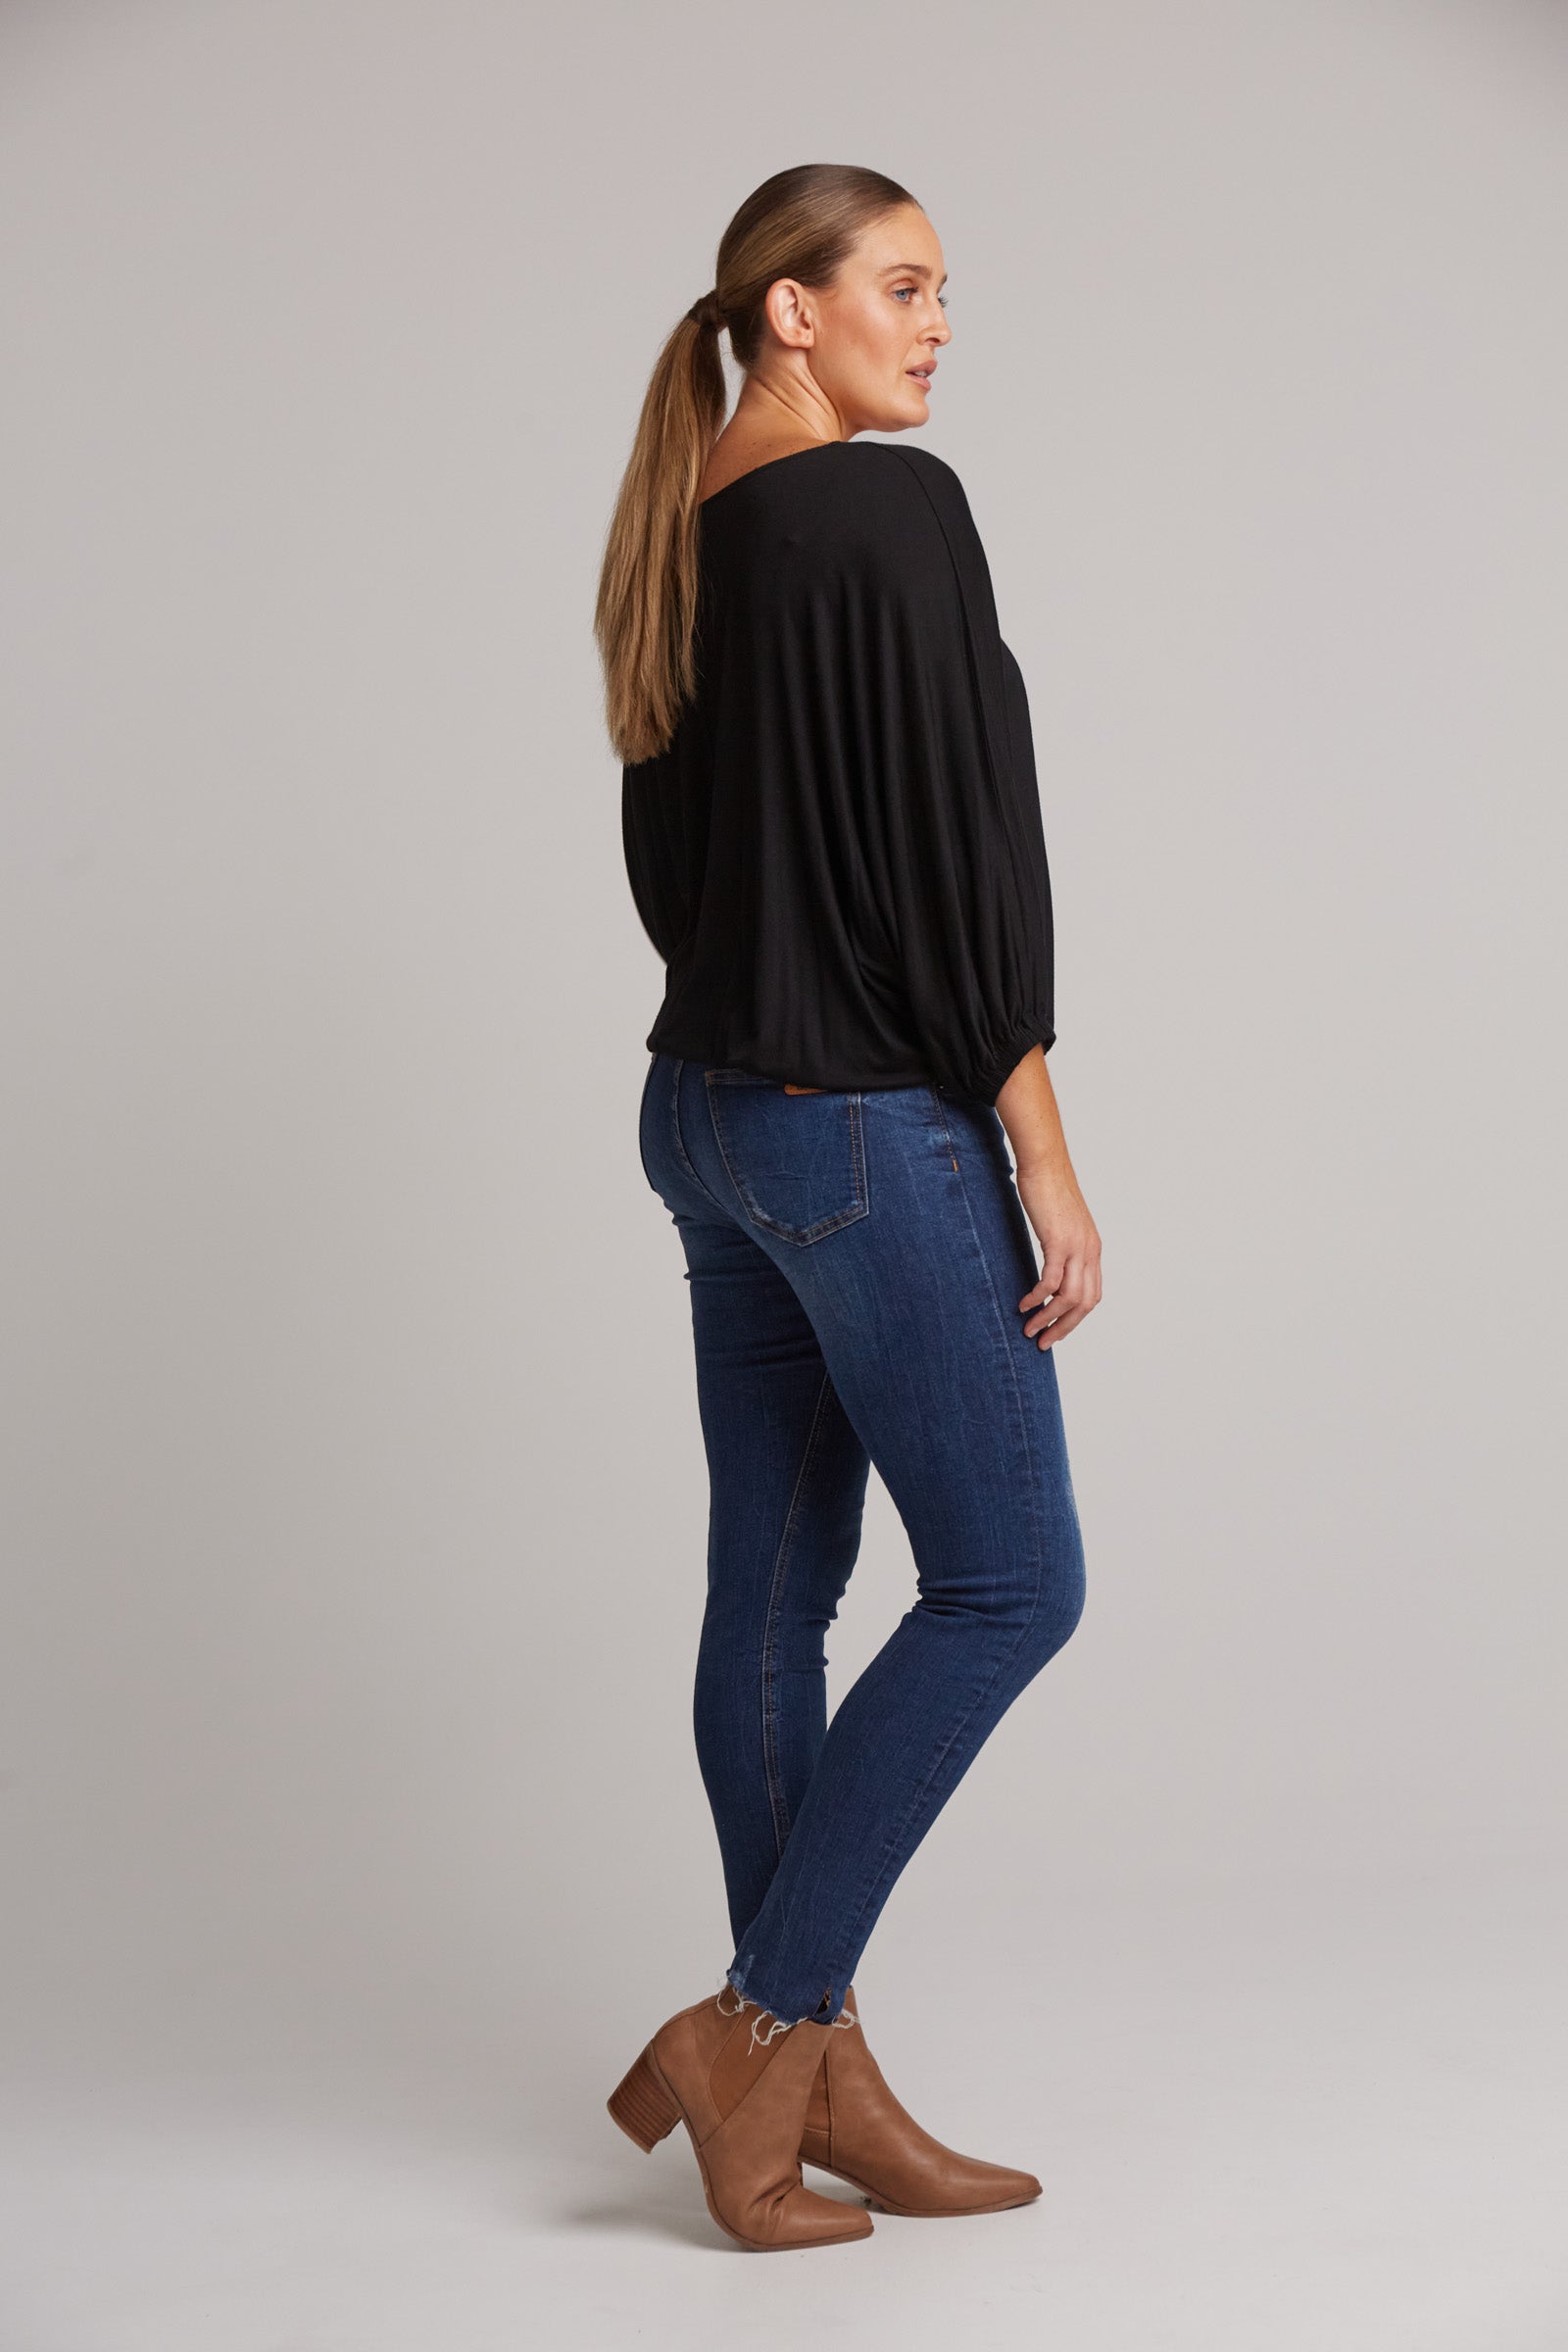 Studio Jersey Relaxed Top - Ebony - eb&ive Clothing - Top 3/4 Sleeve Jersey